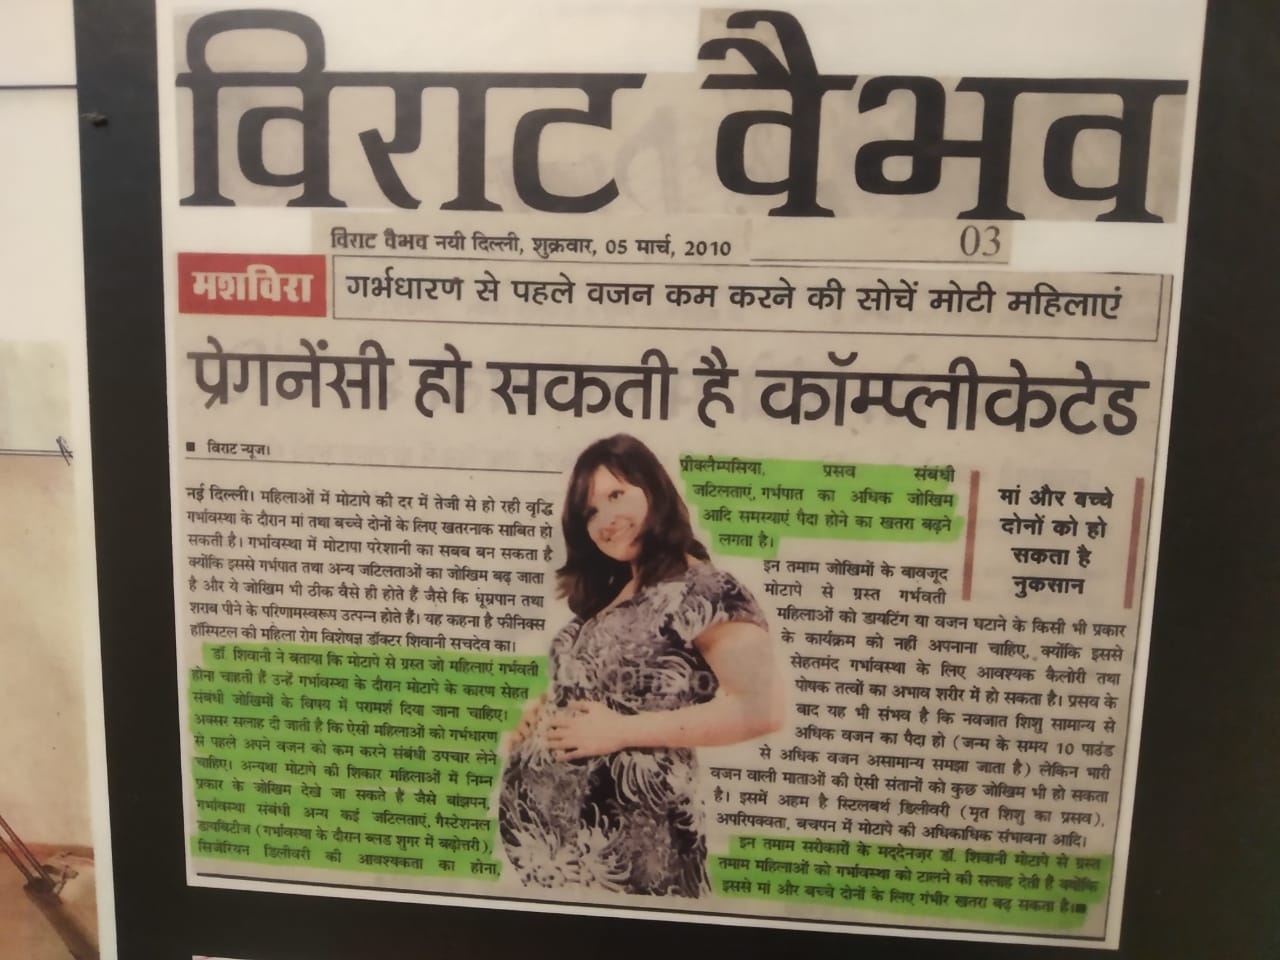 Pregnancy can be complicated due to obesity - dr shivani sachdev gour